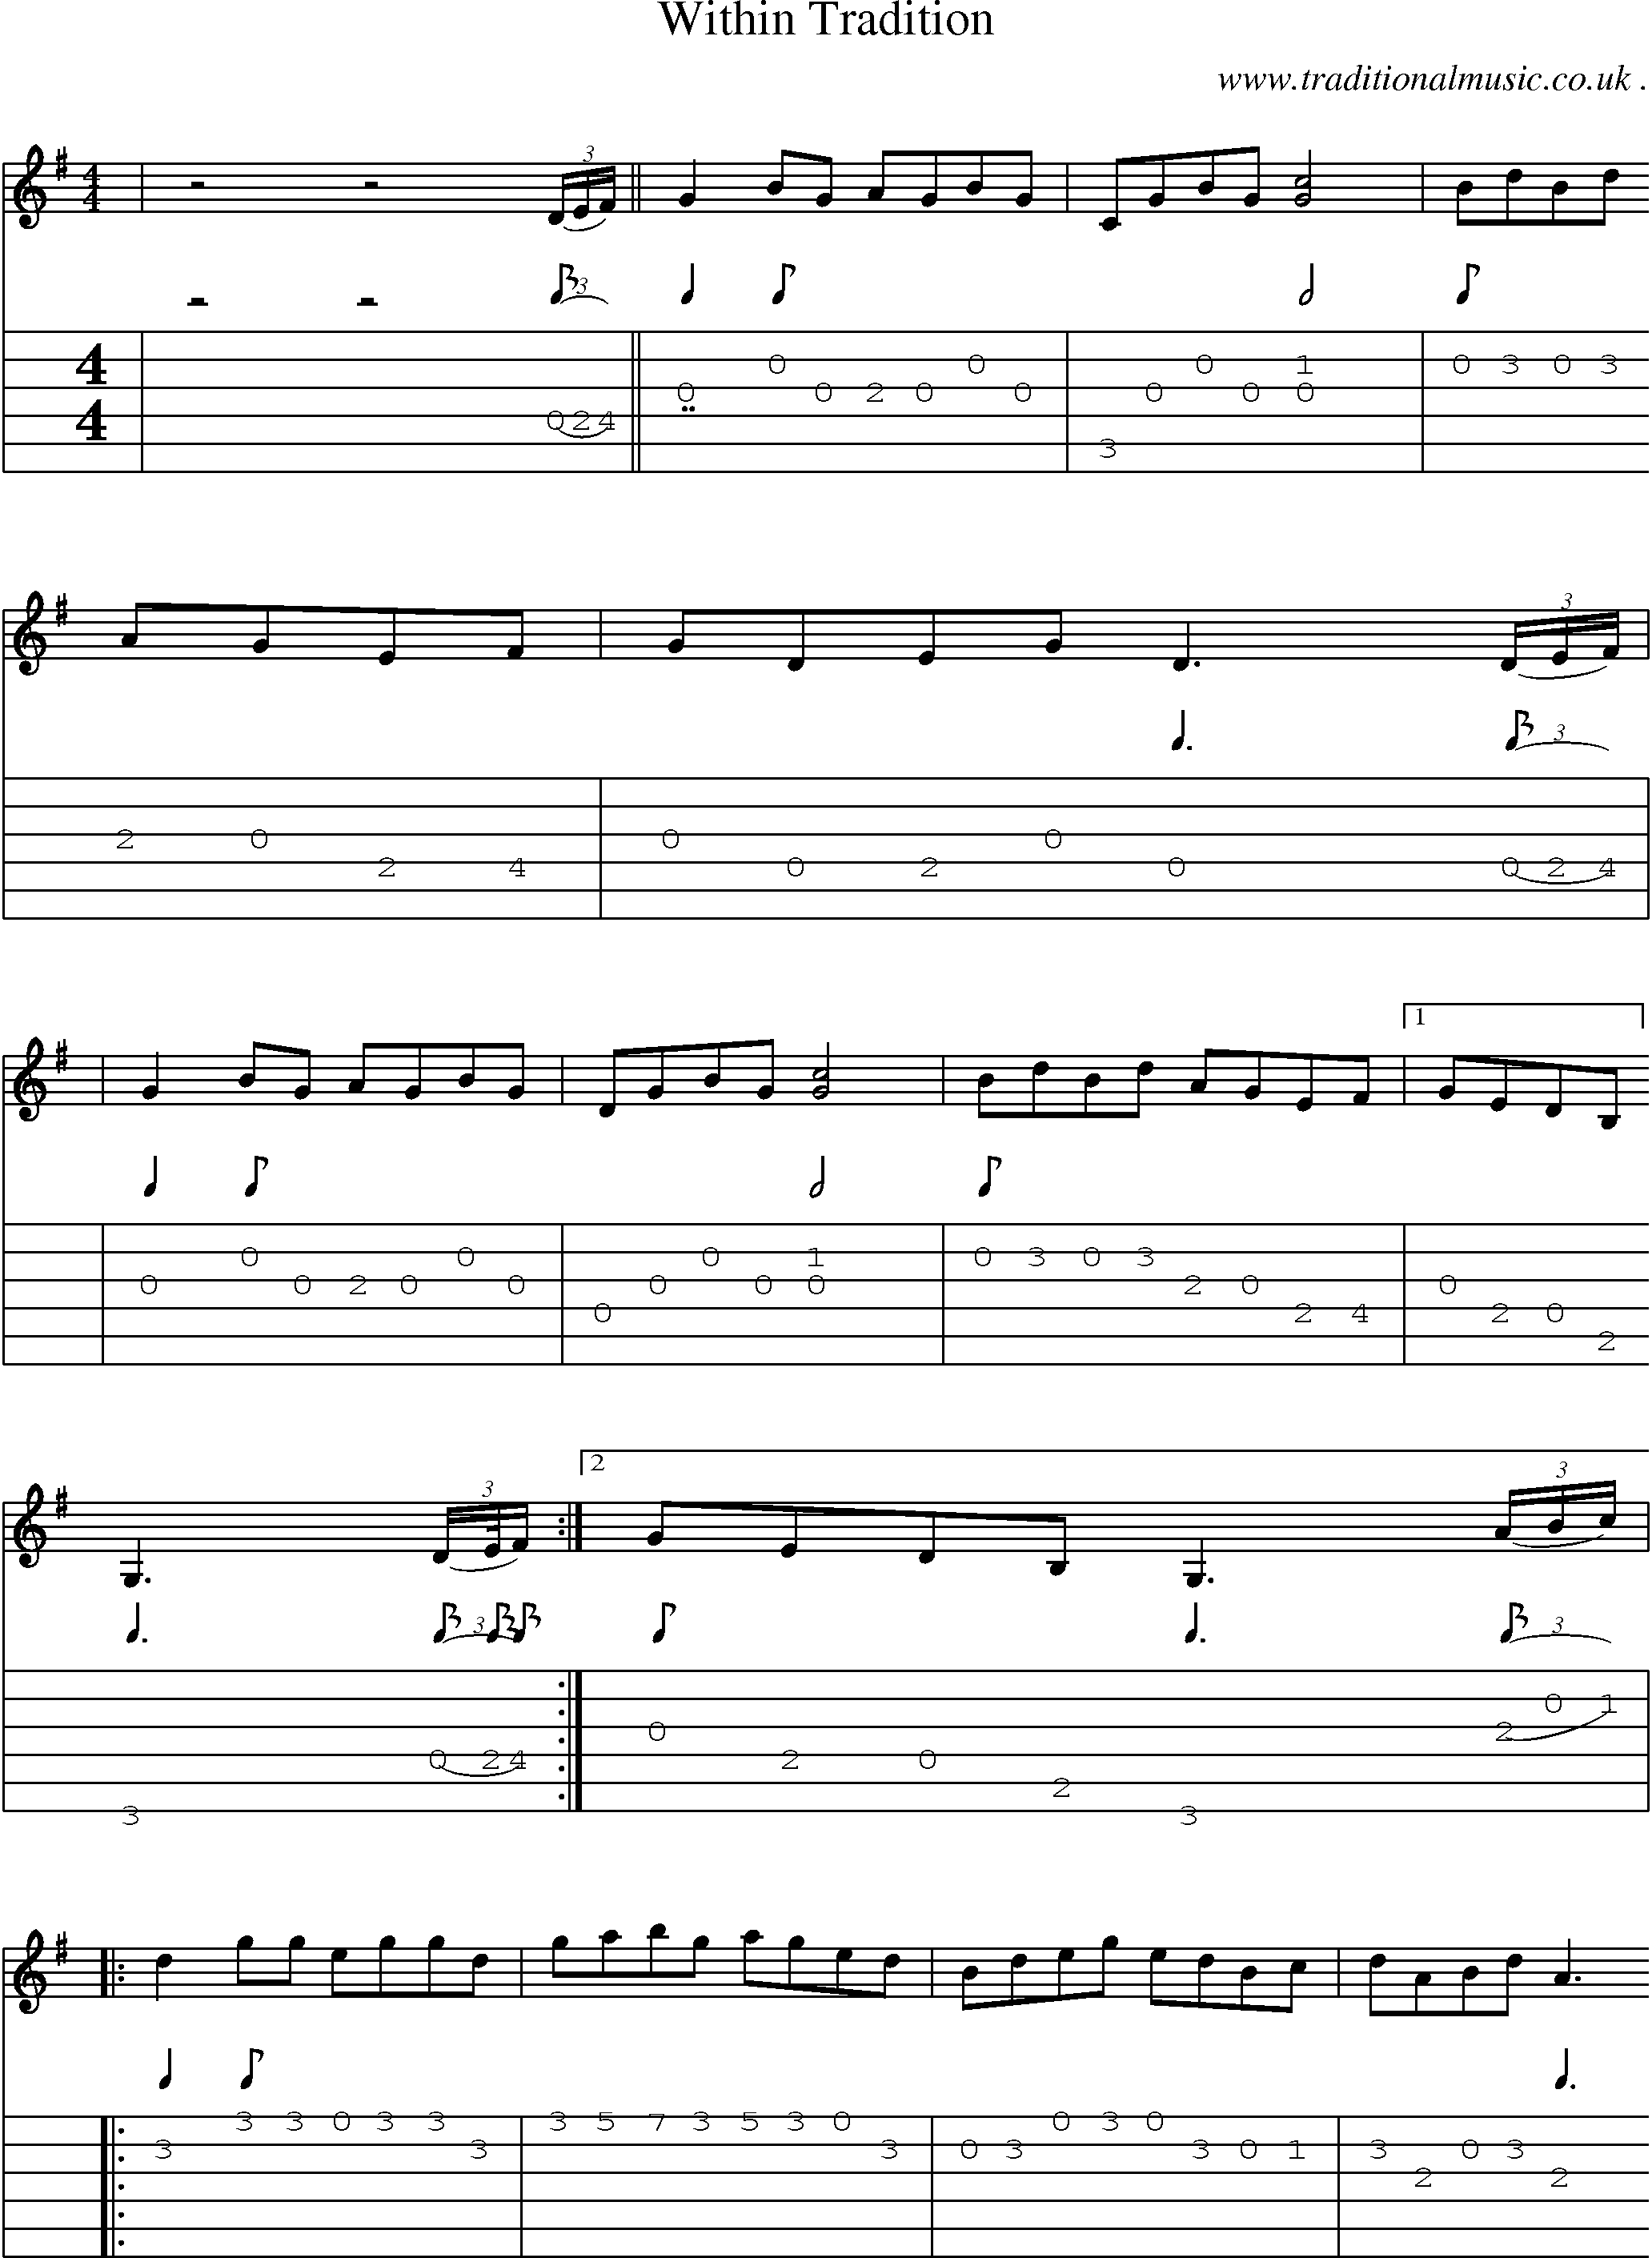 Music Score and Guitar Tabs for Within Tradition